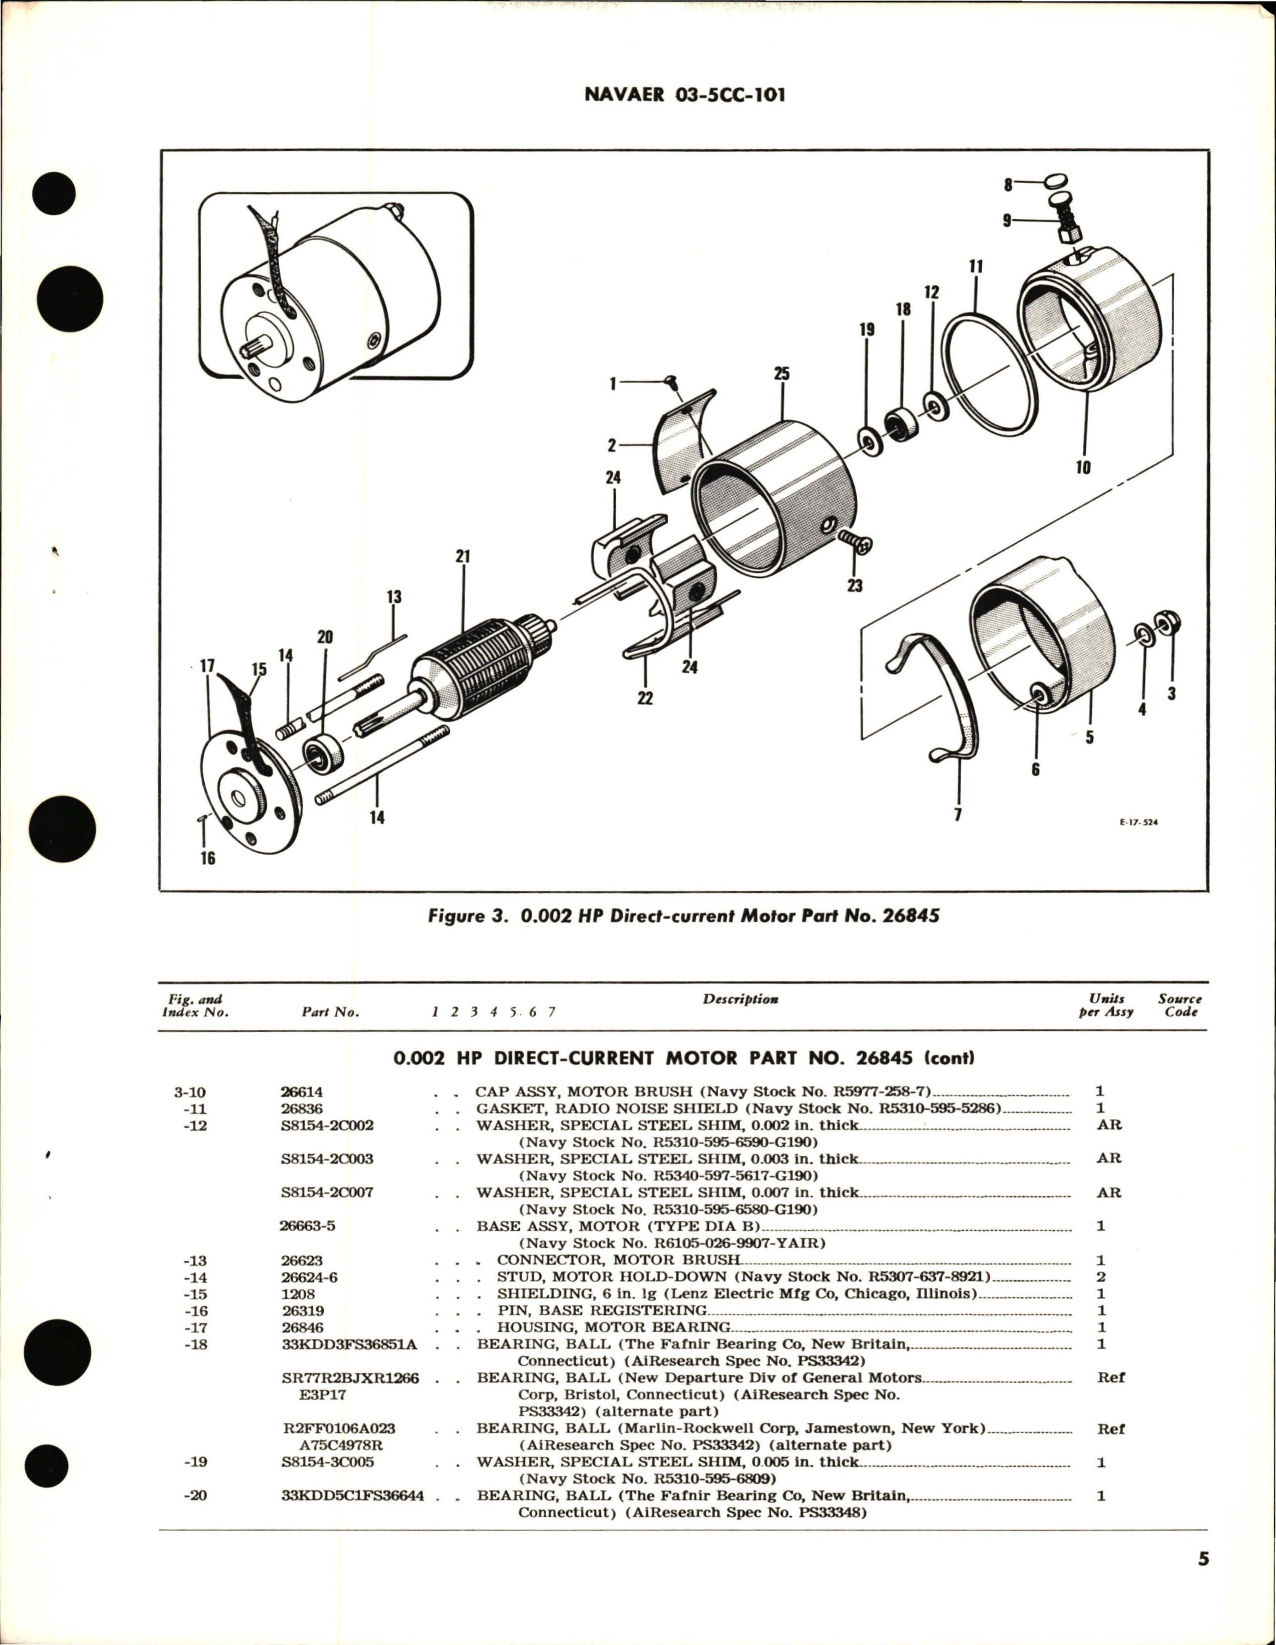 Sample page 5 from AirCorps Library document: Overhaul Instructions with Parts Breakdown for HP Direct Current Motor 0.002 Part 26845